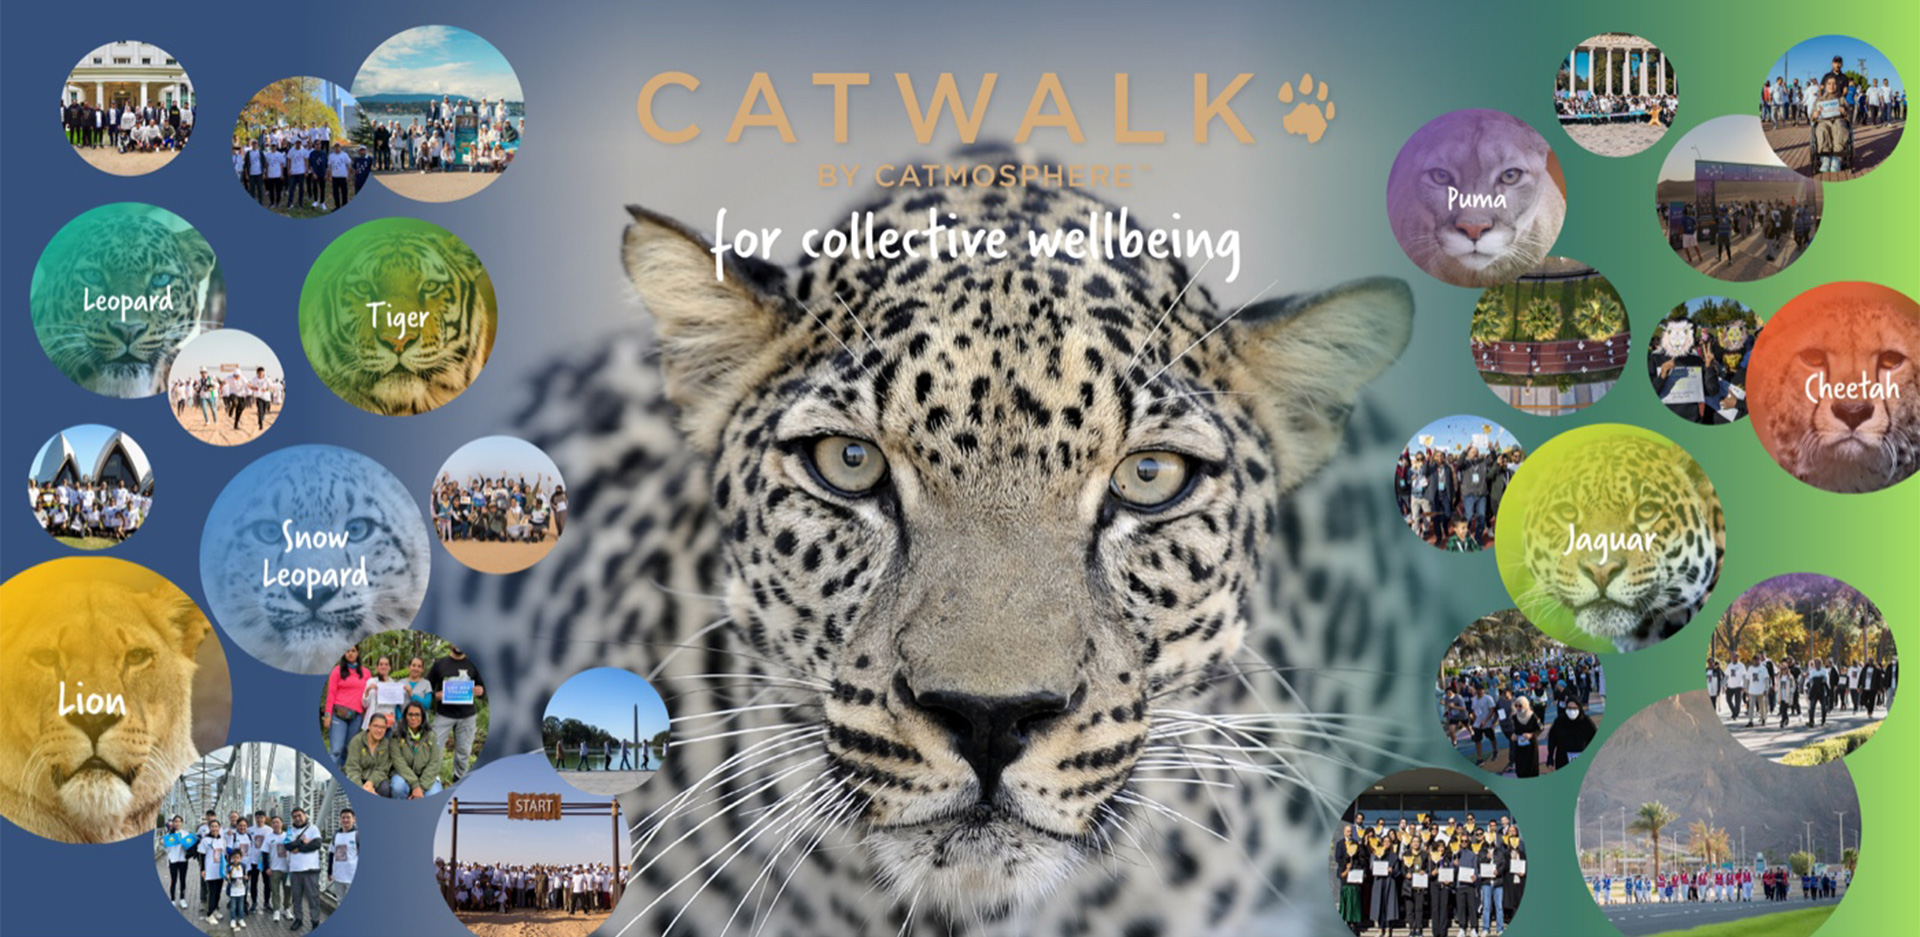 "Collage of Arabian Leopard, Other Big Cats, and People"